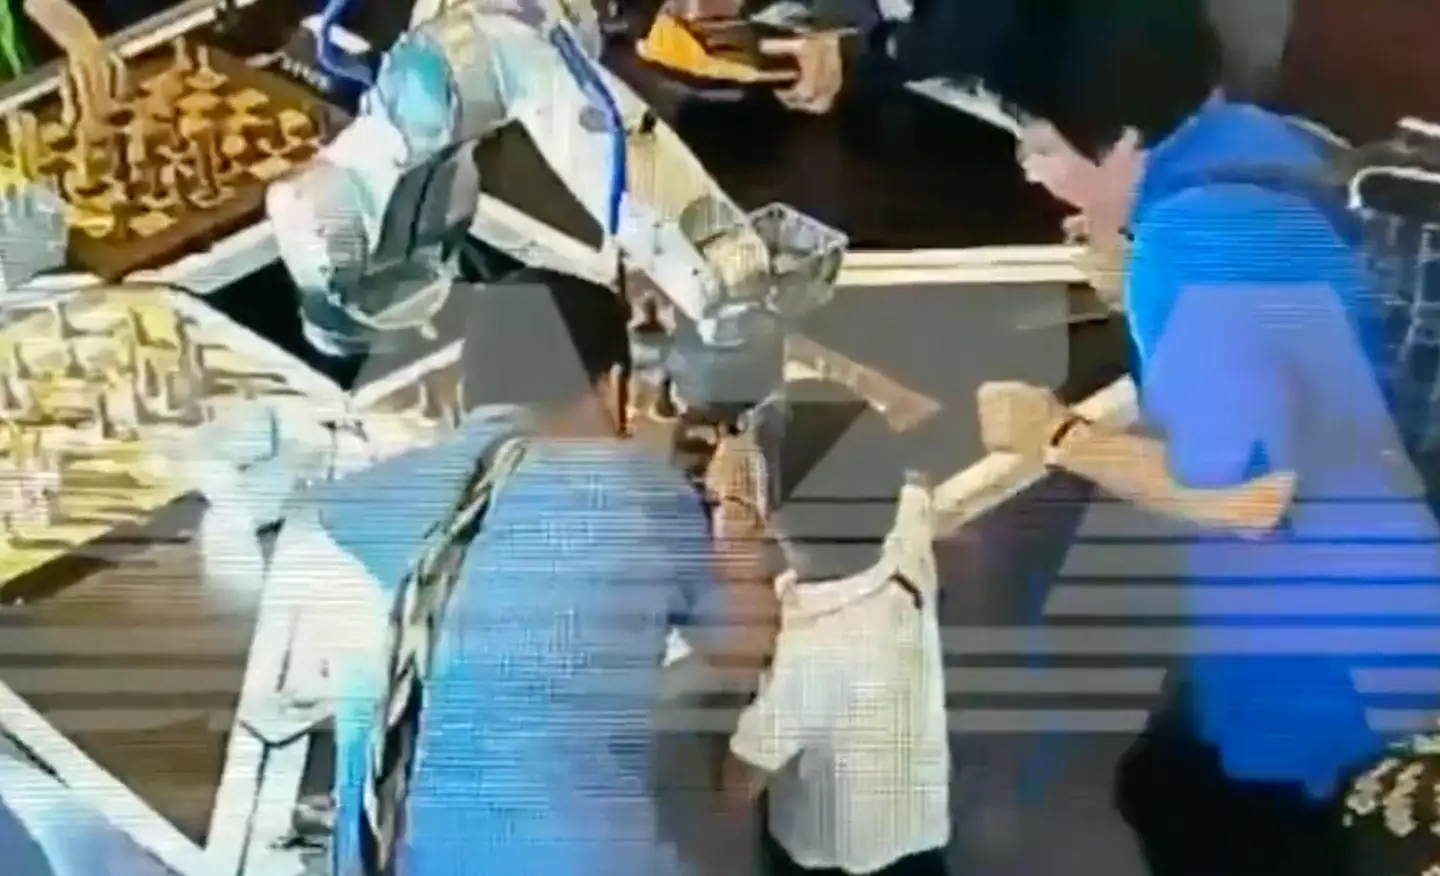 Adults rushed to help the child when they realised the robot had his finger.